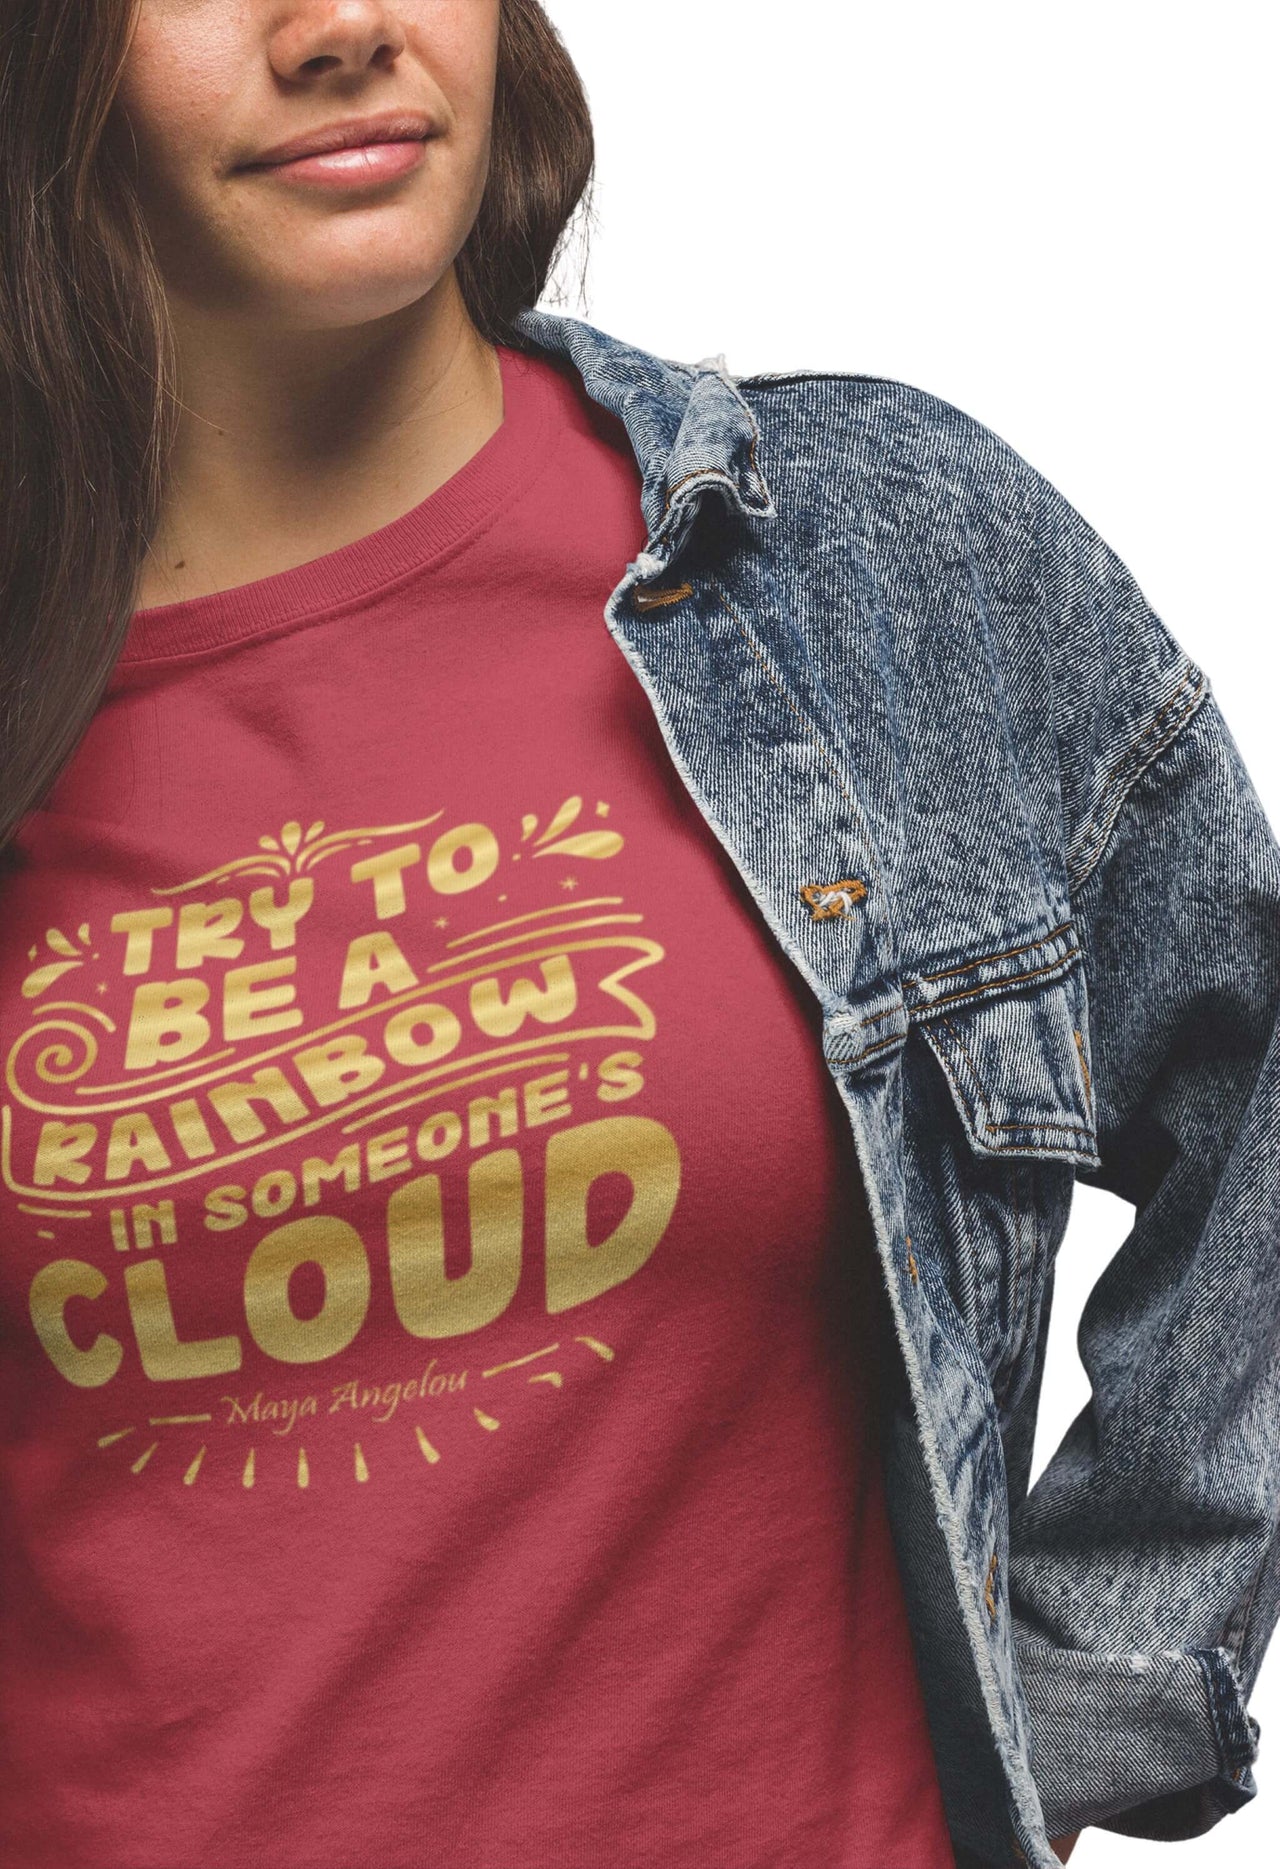 Be a Rainbow in Someones Cloud - Maya Angelou Inspirational Quote - Vintage Unisex Tee